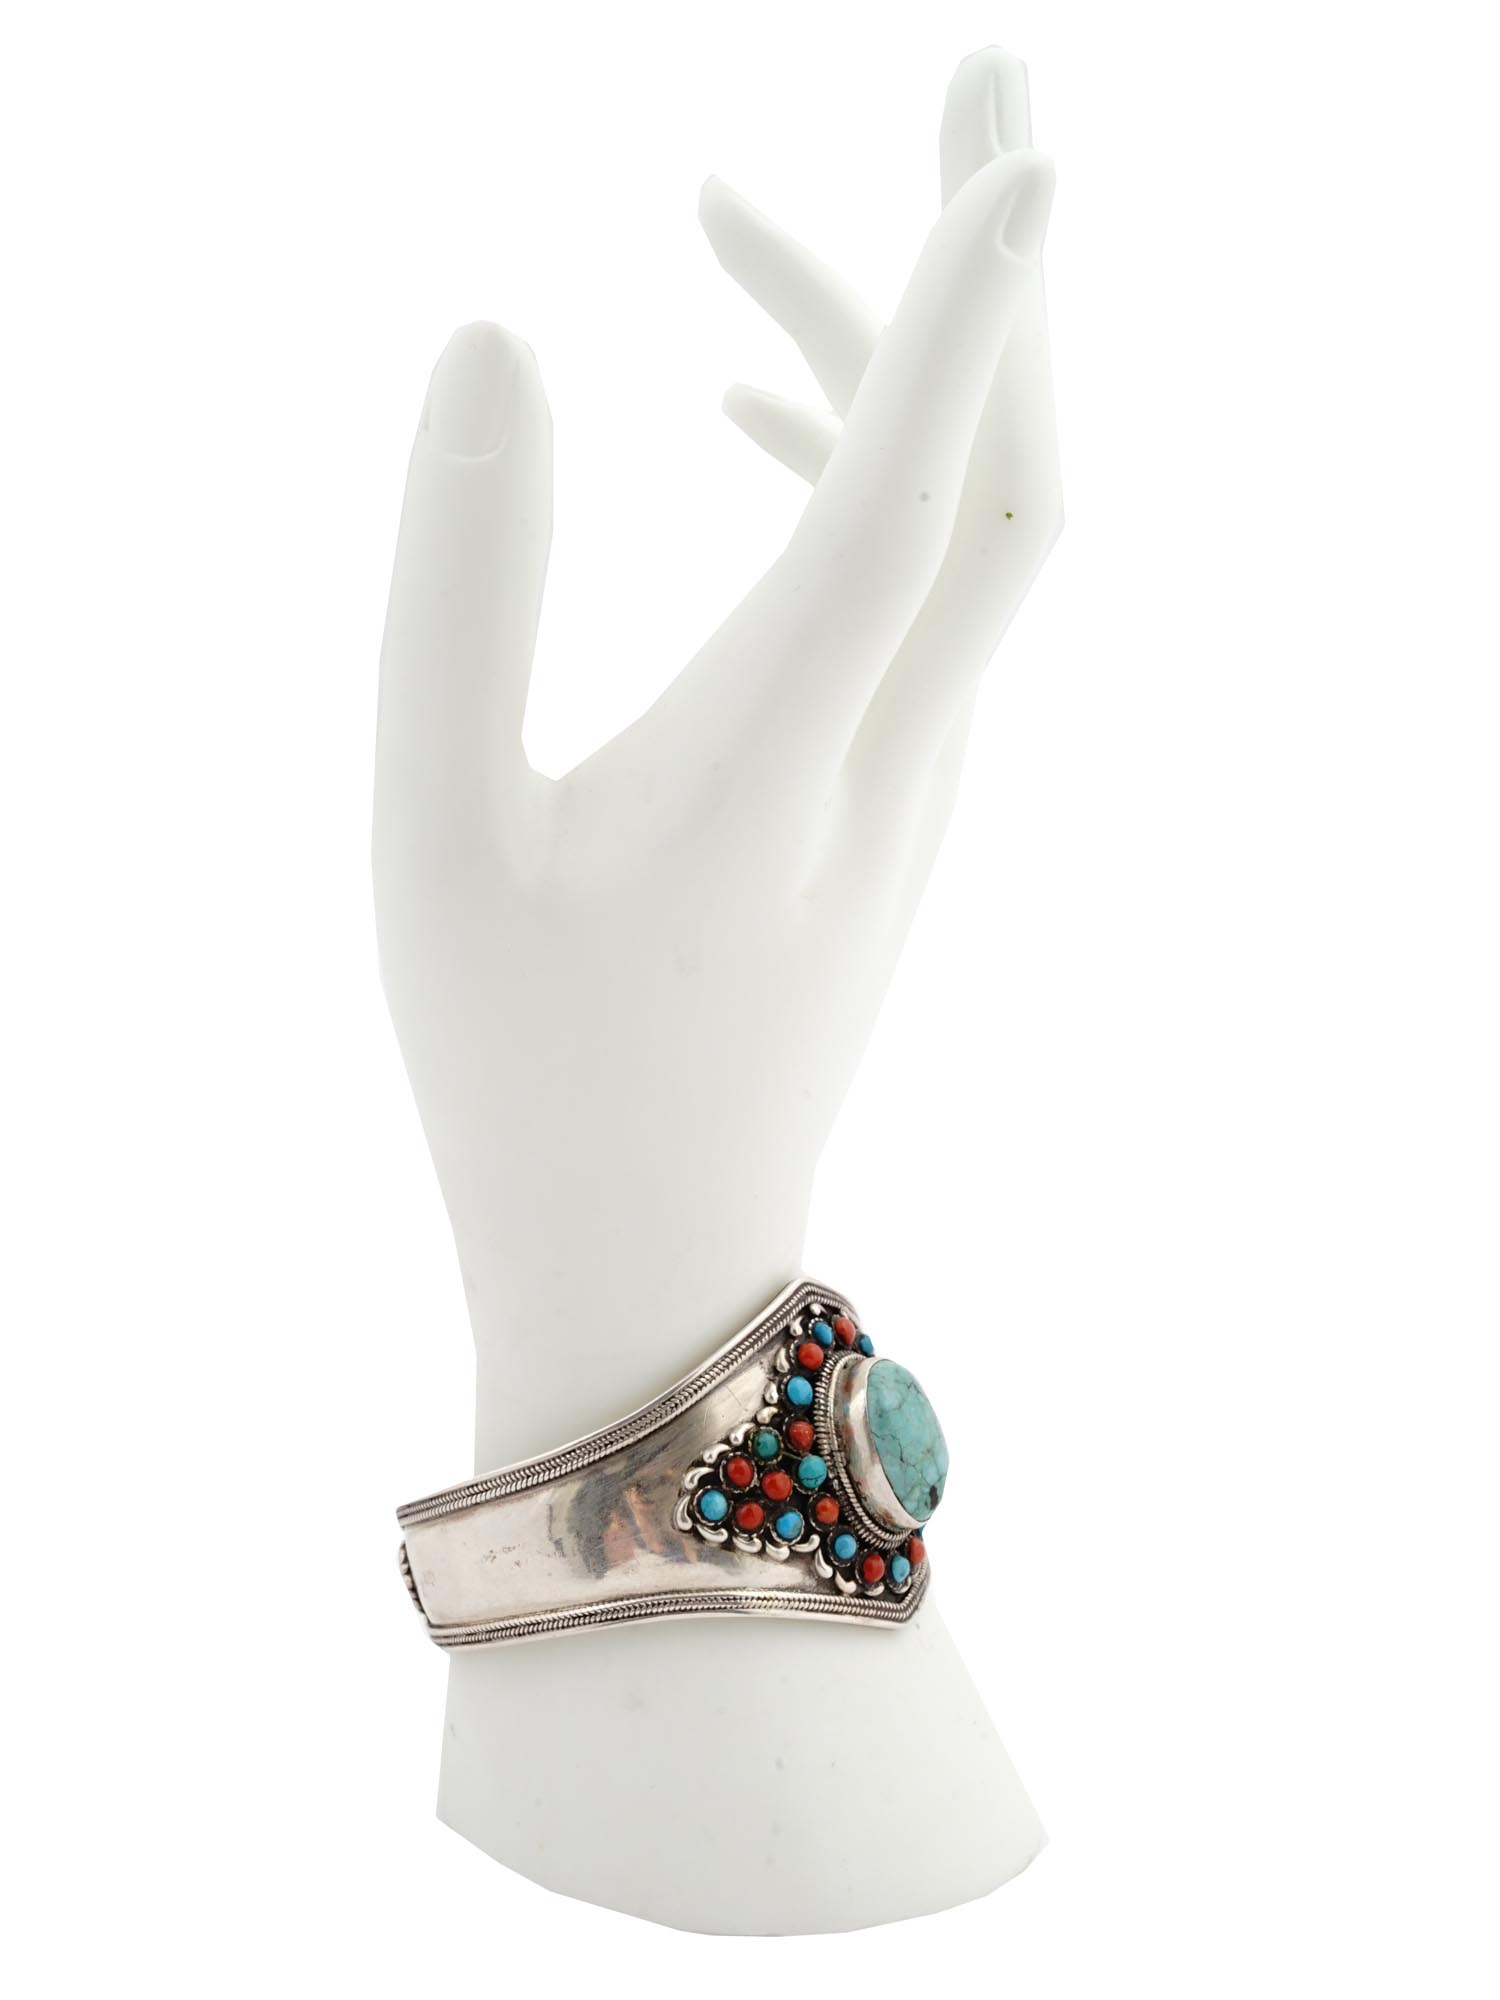 VINTAGE TIBETIAN TURQUOISE SILVER CUFF BRACELET PIC-0